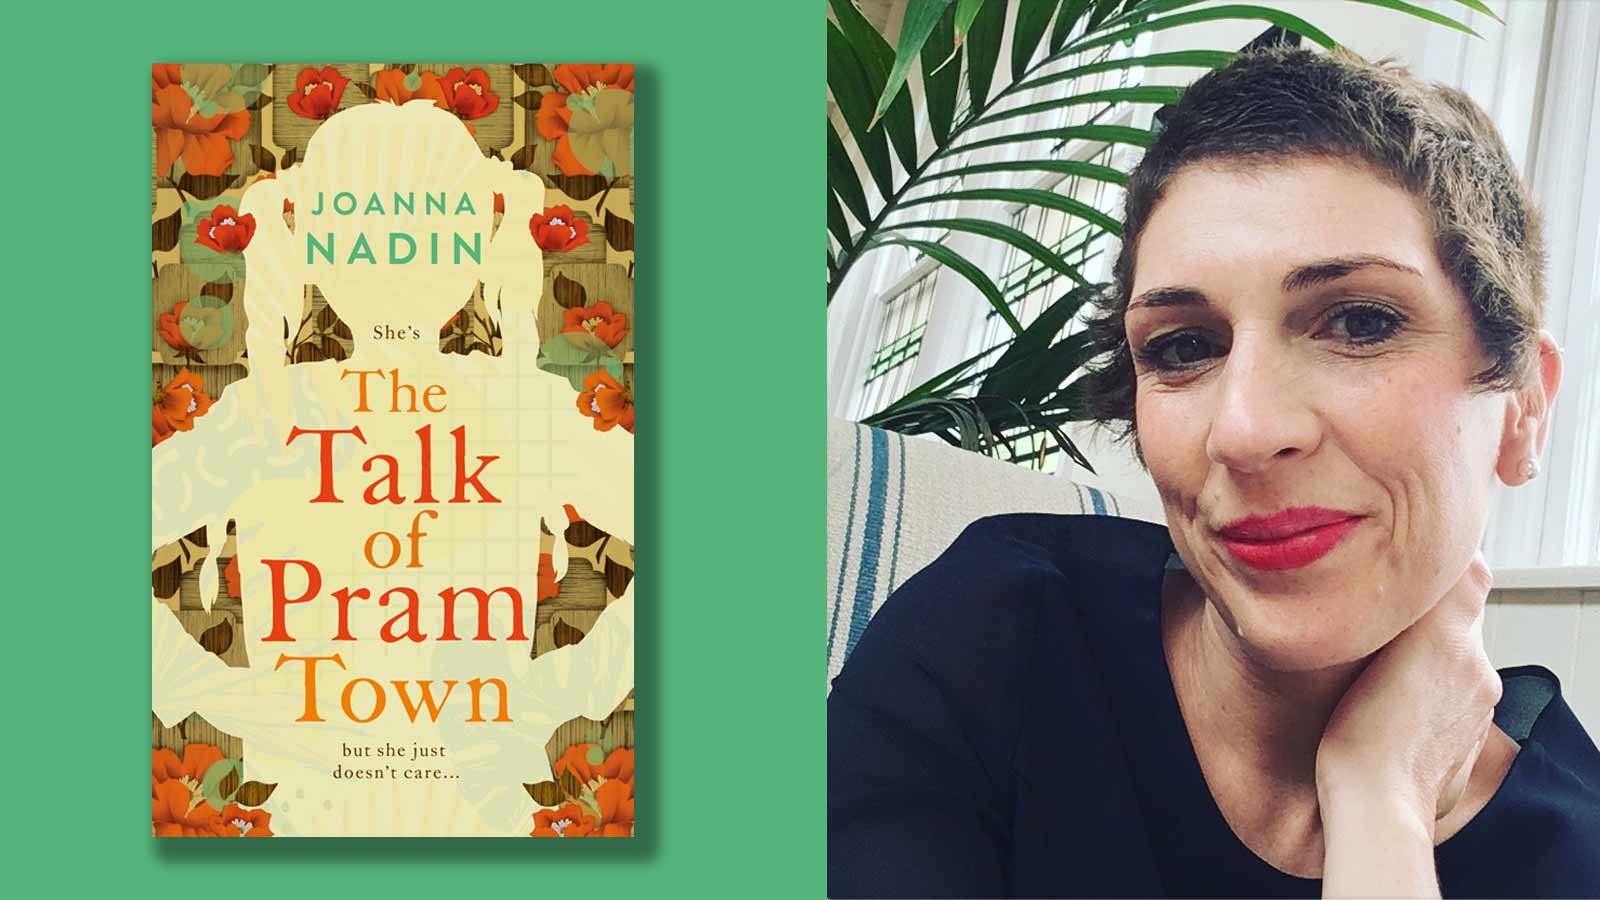 The Talk of Pram Town book cover and photo of Joanna Nadin